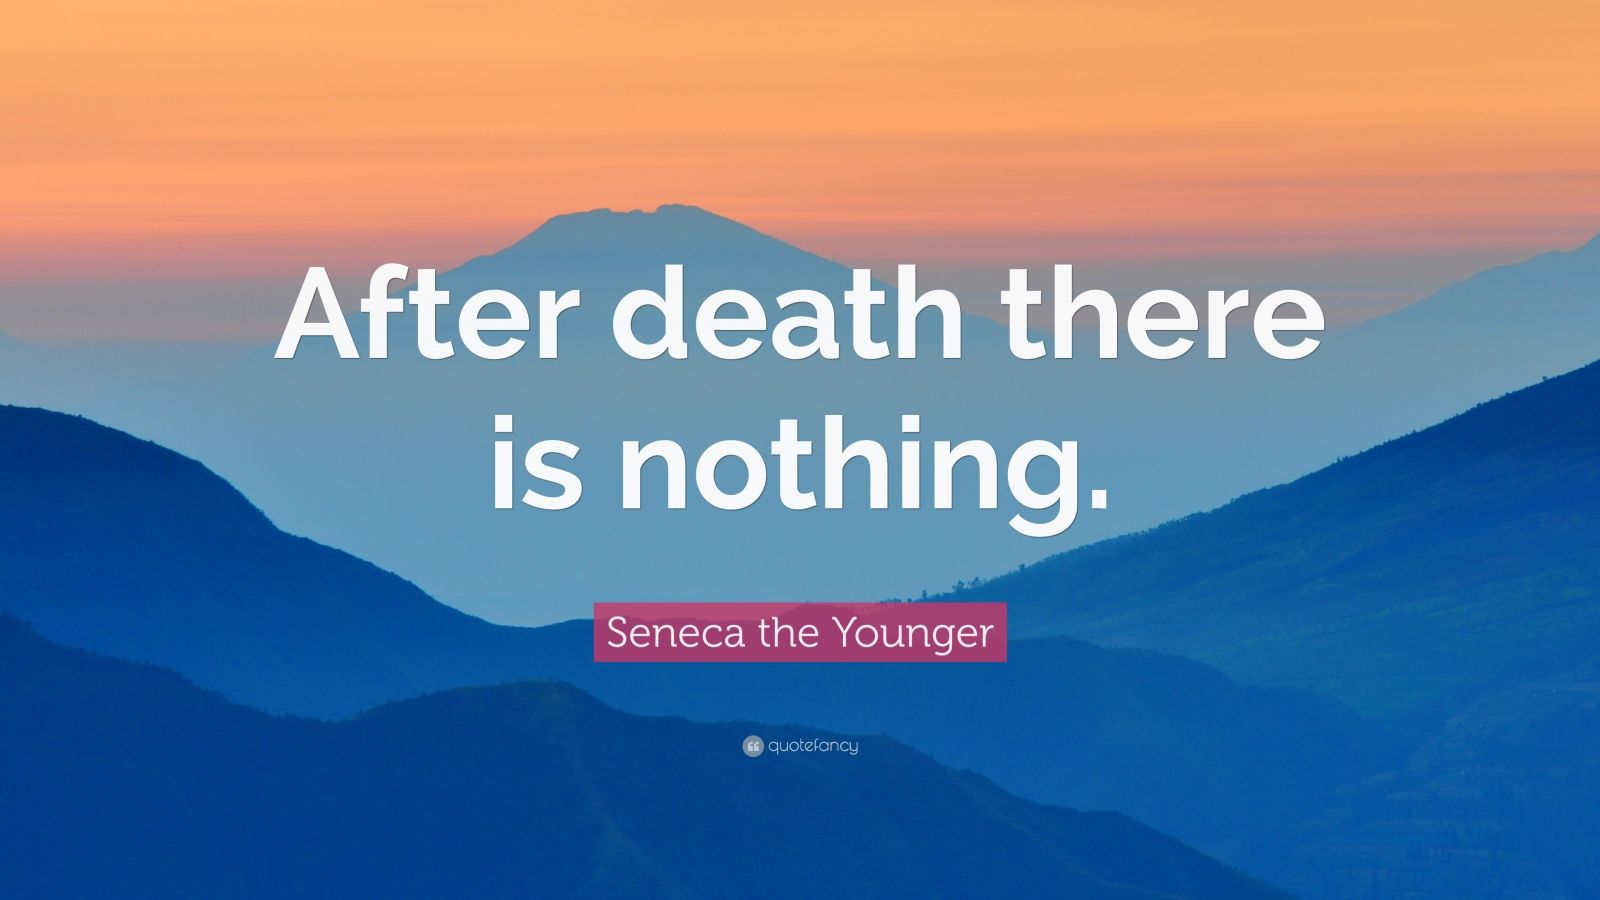 Seneca the Younger Quote: “After death there is nothing.”